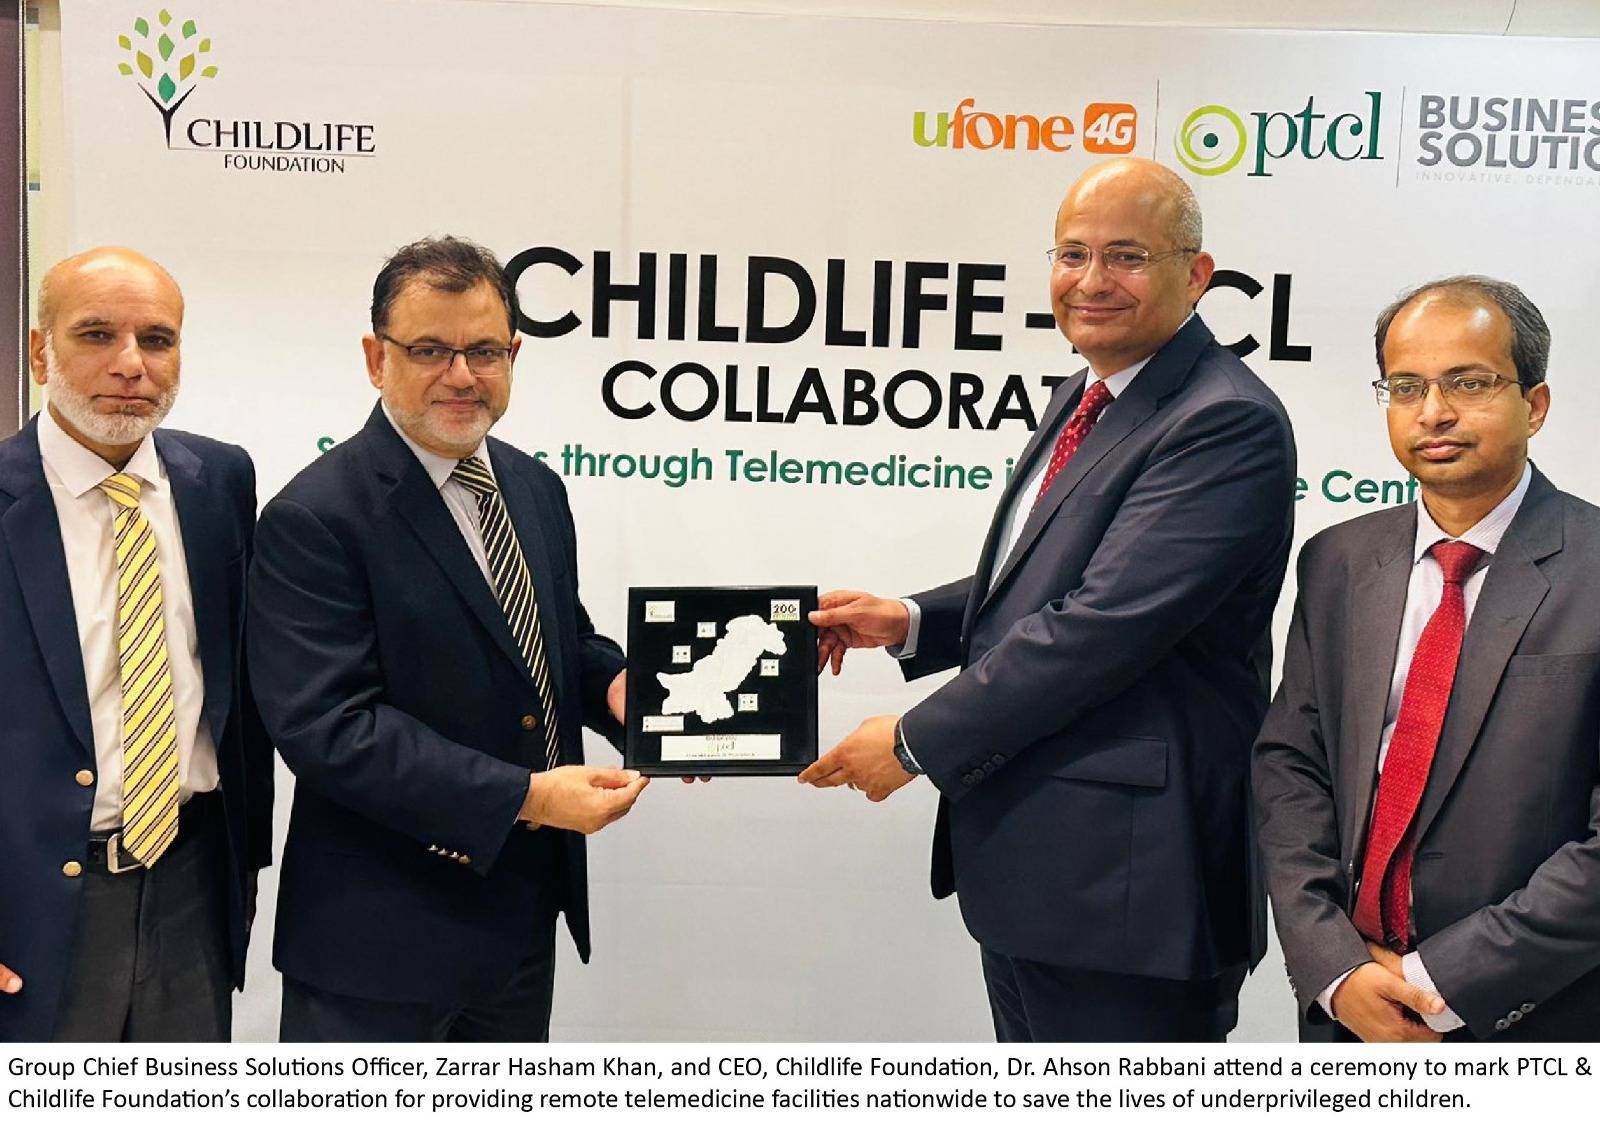 PTCL & ChildLife Foundation join hands to save children  through Telemedicine Facility